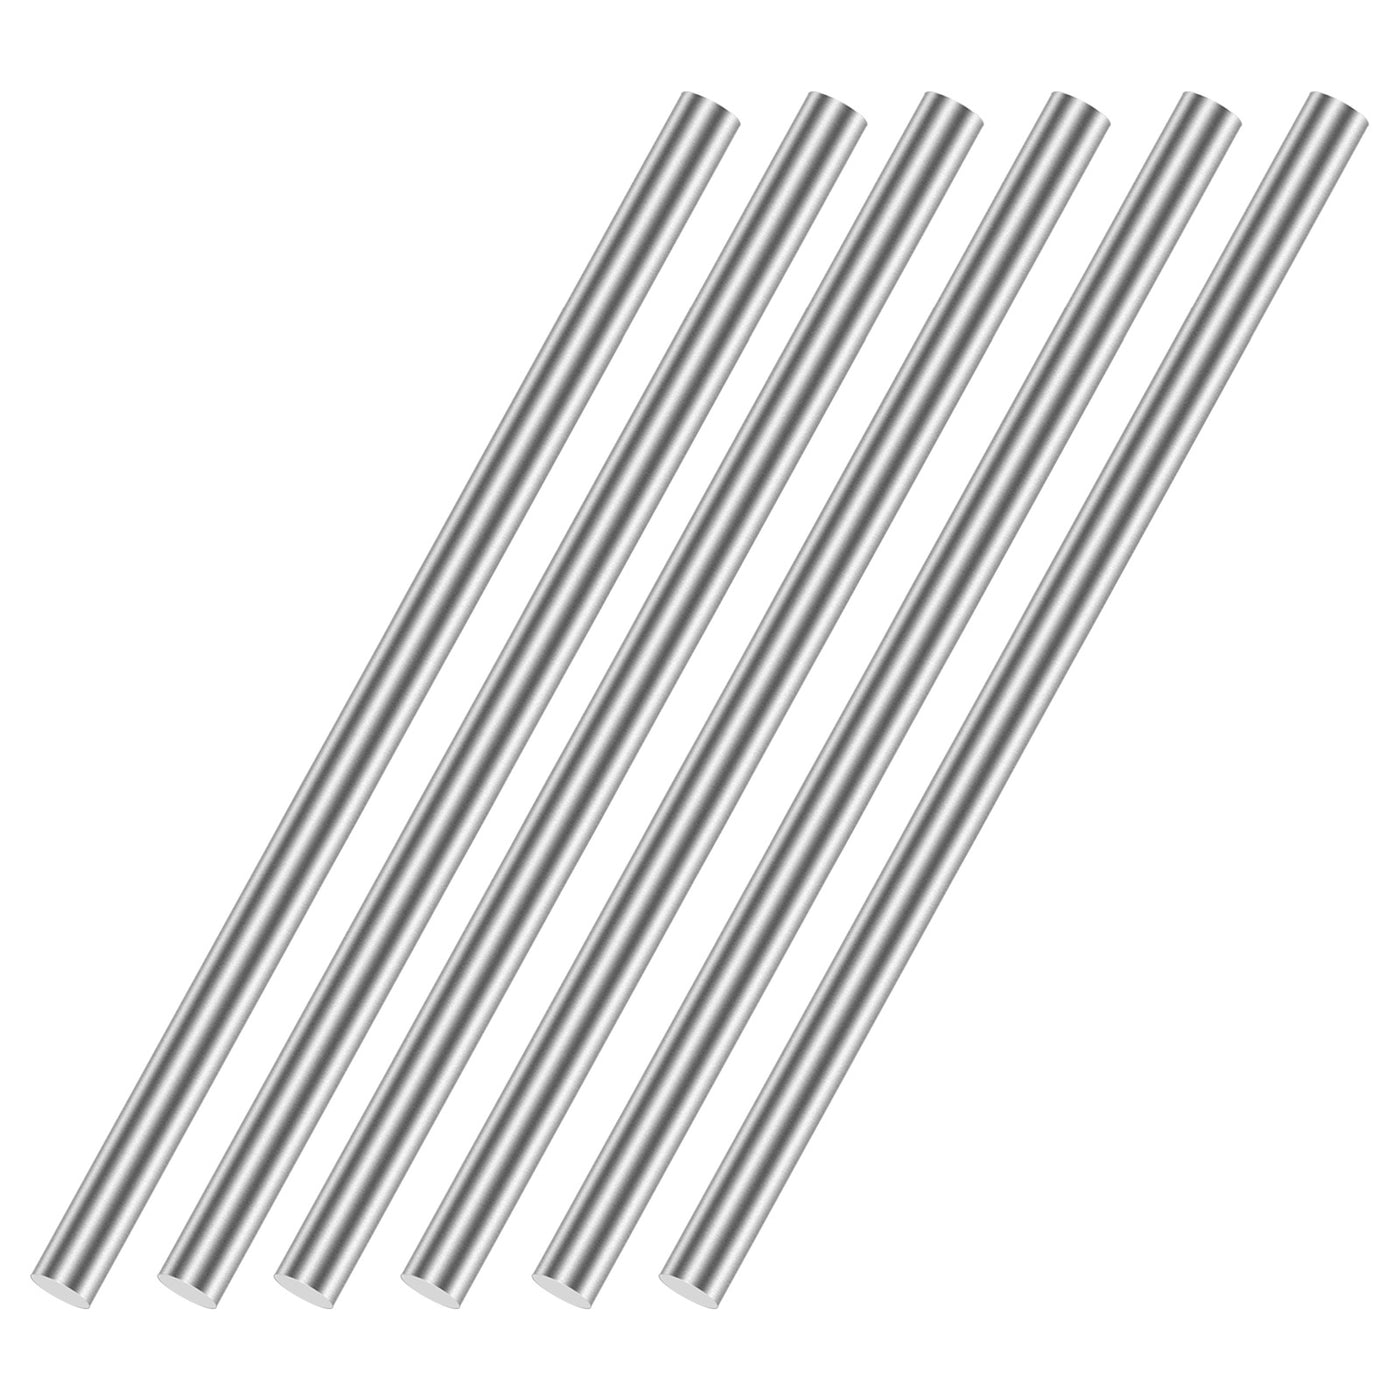 uxcell Uxcell 5mm x 100mm 304 Stainless Steel Solid Round Rod for DIY Craft - 6pcs